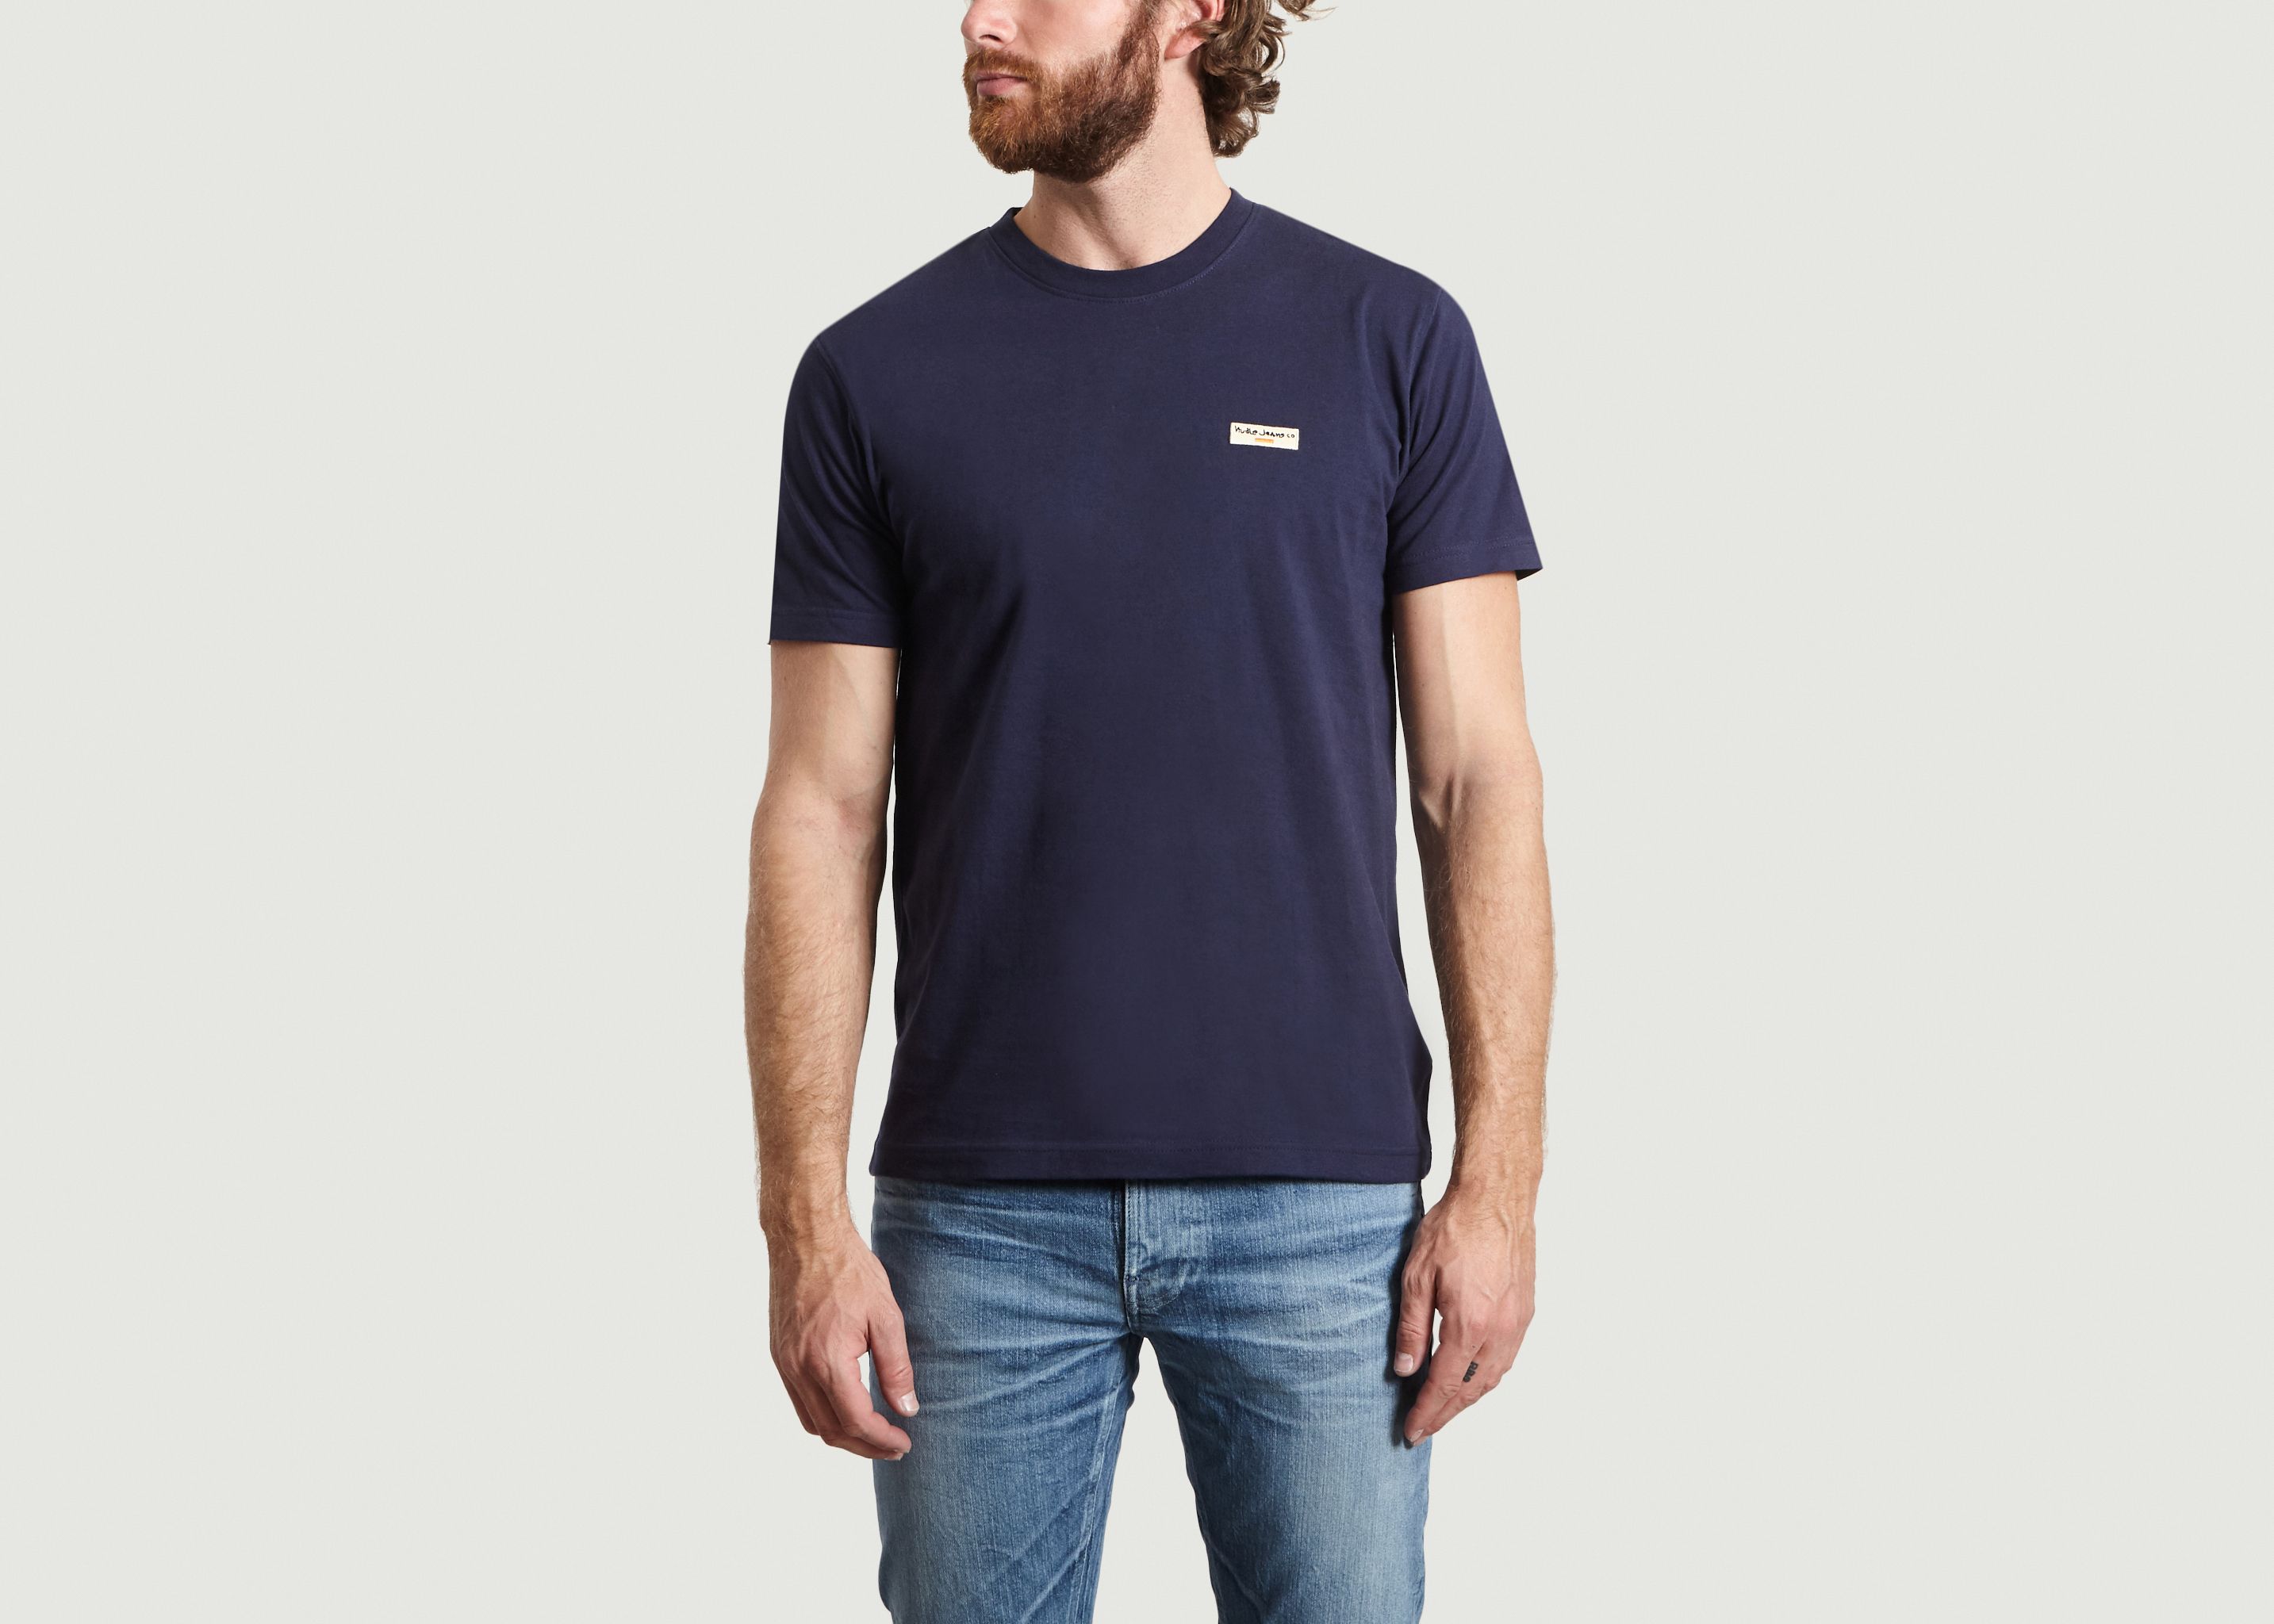 jeans with navy blue t shirt